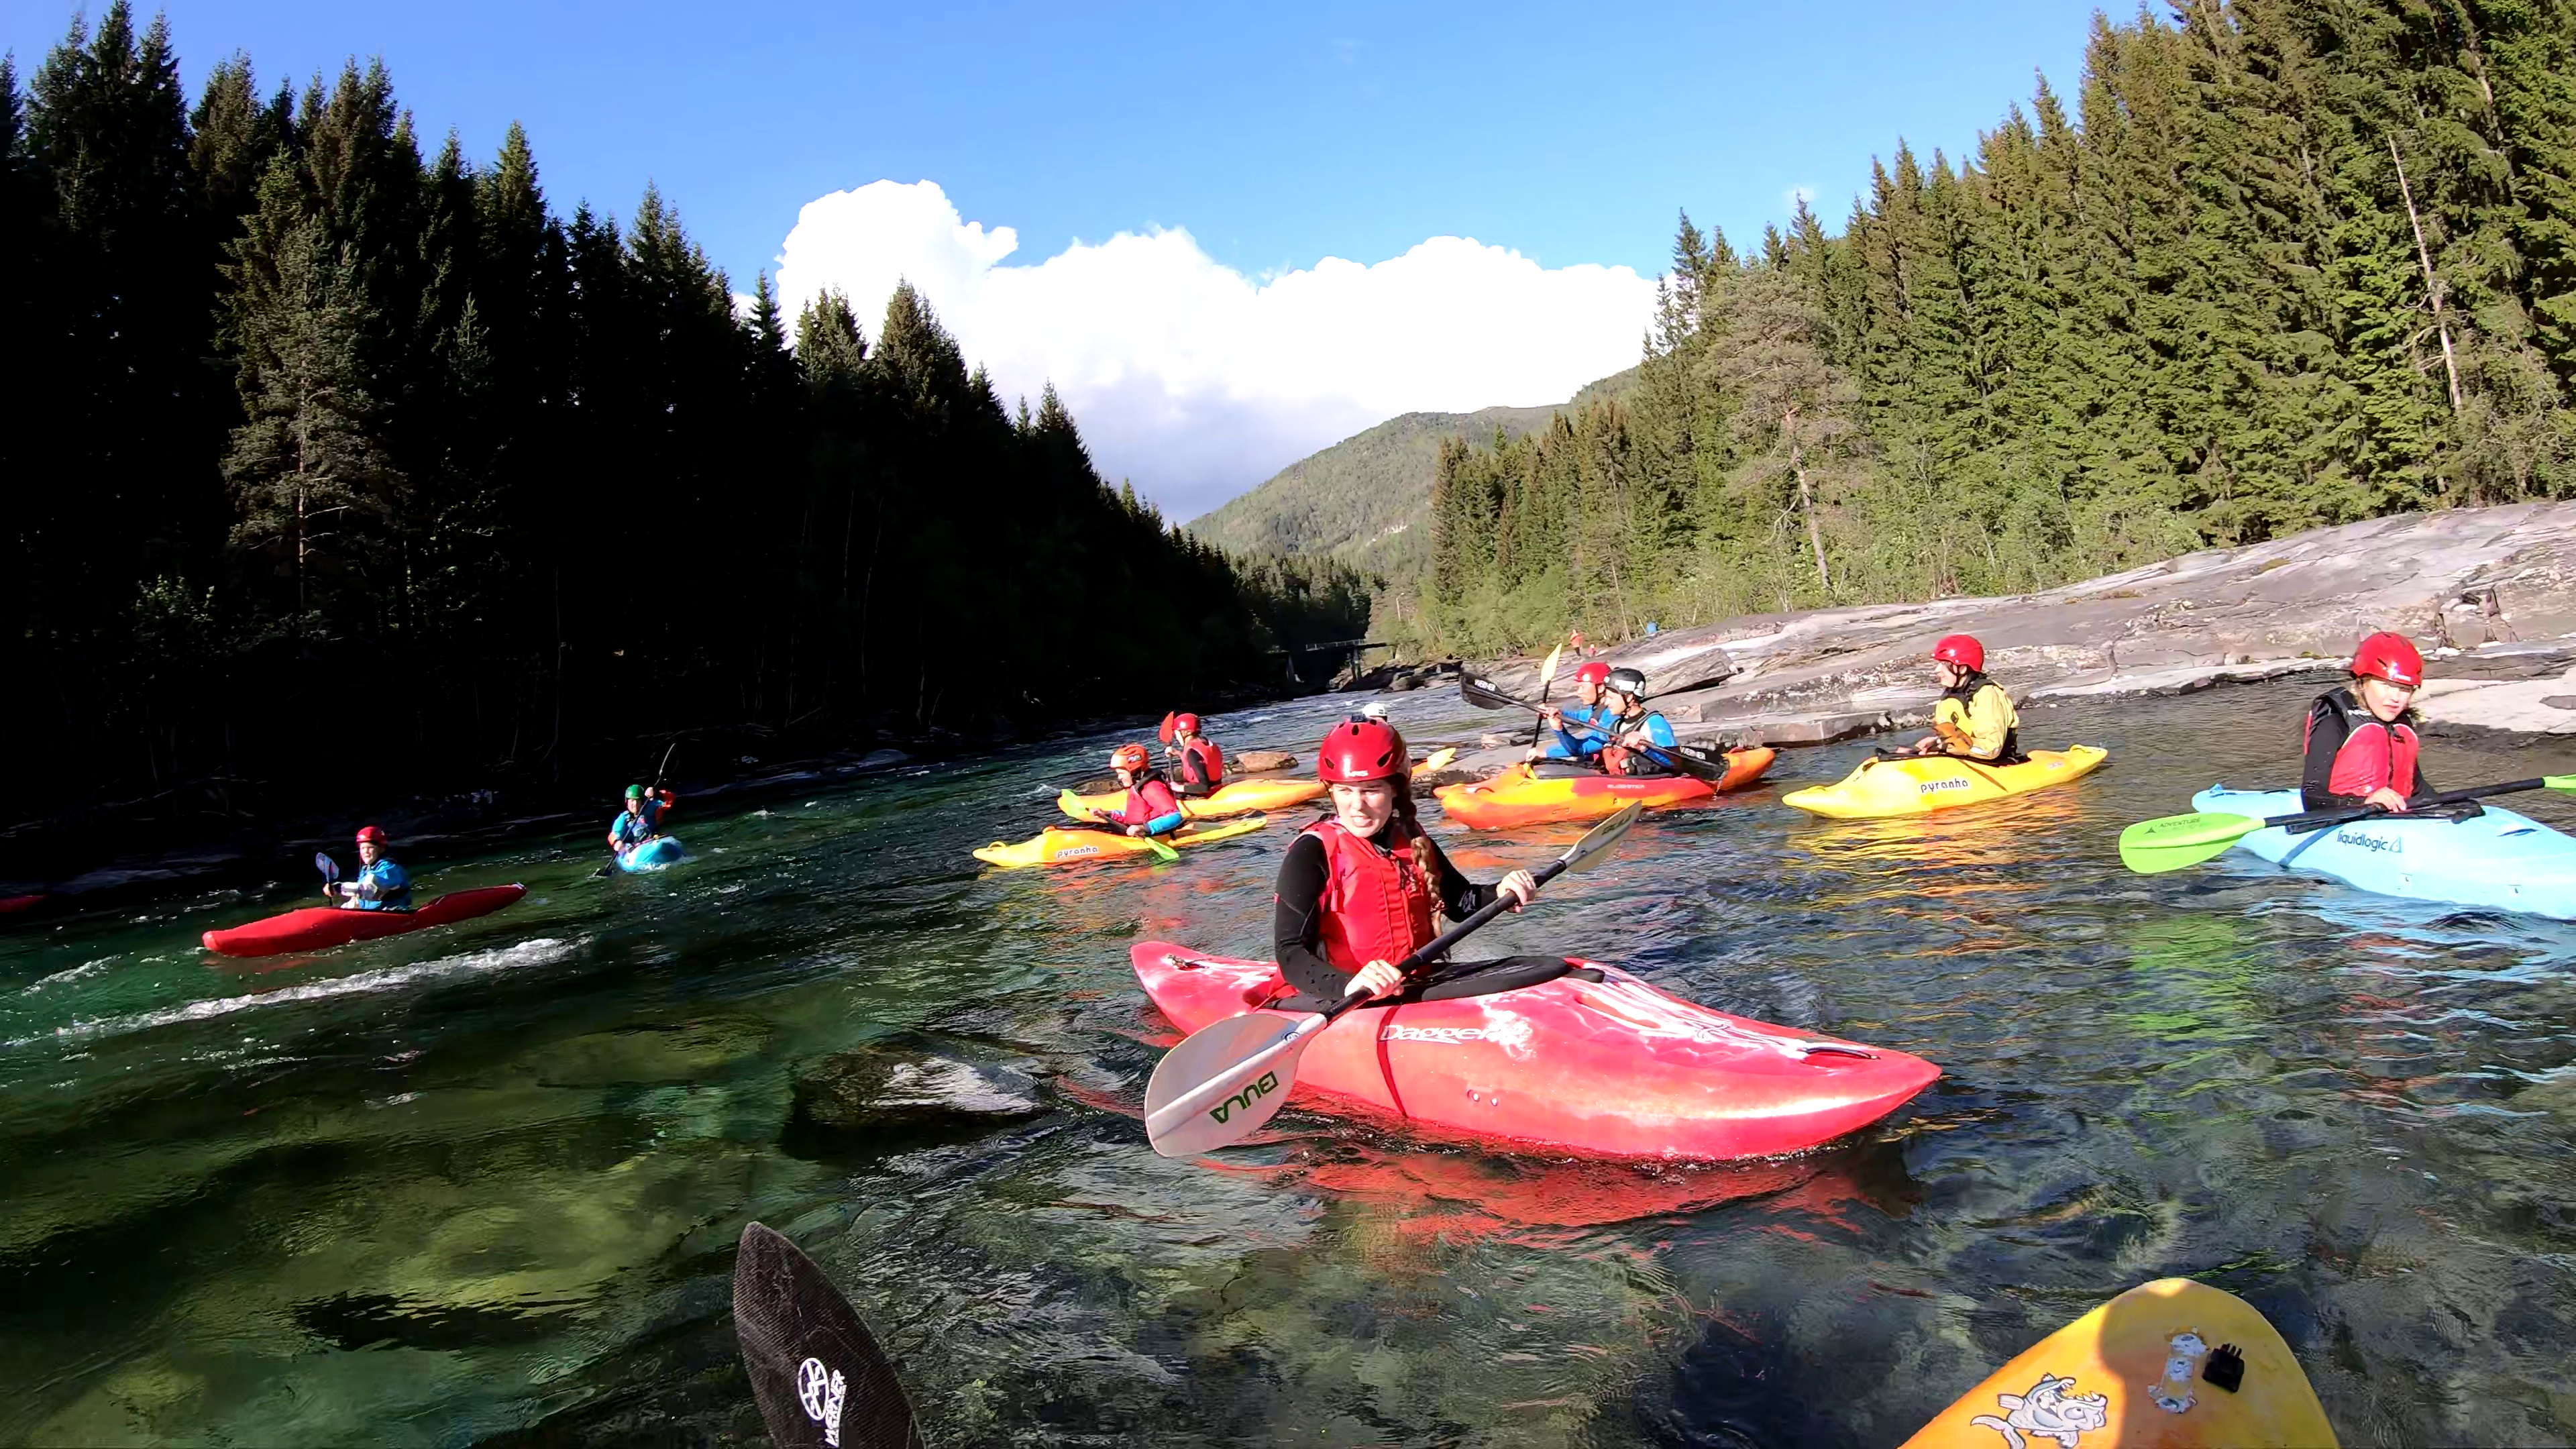 Kayaking: A group uses kayaks to move over the river, Extended water trip. 3840x2160 4K Background.